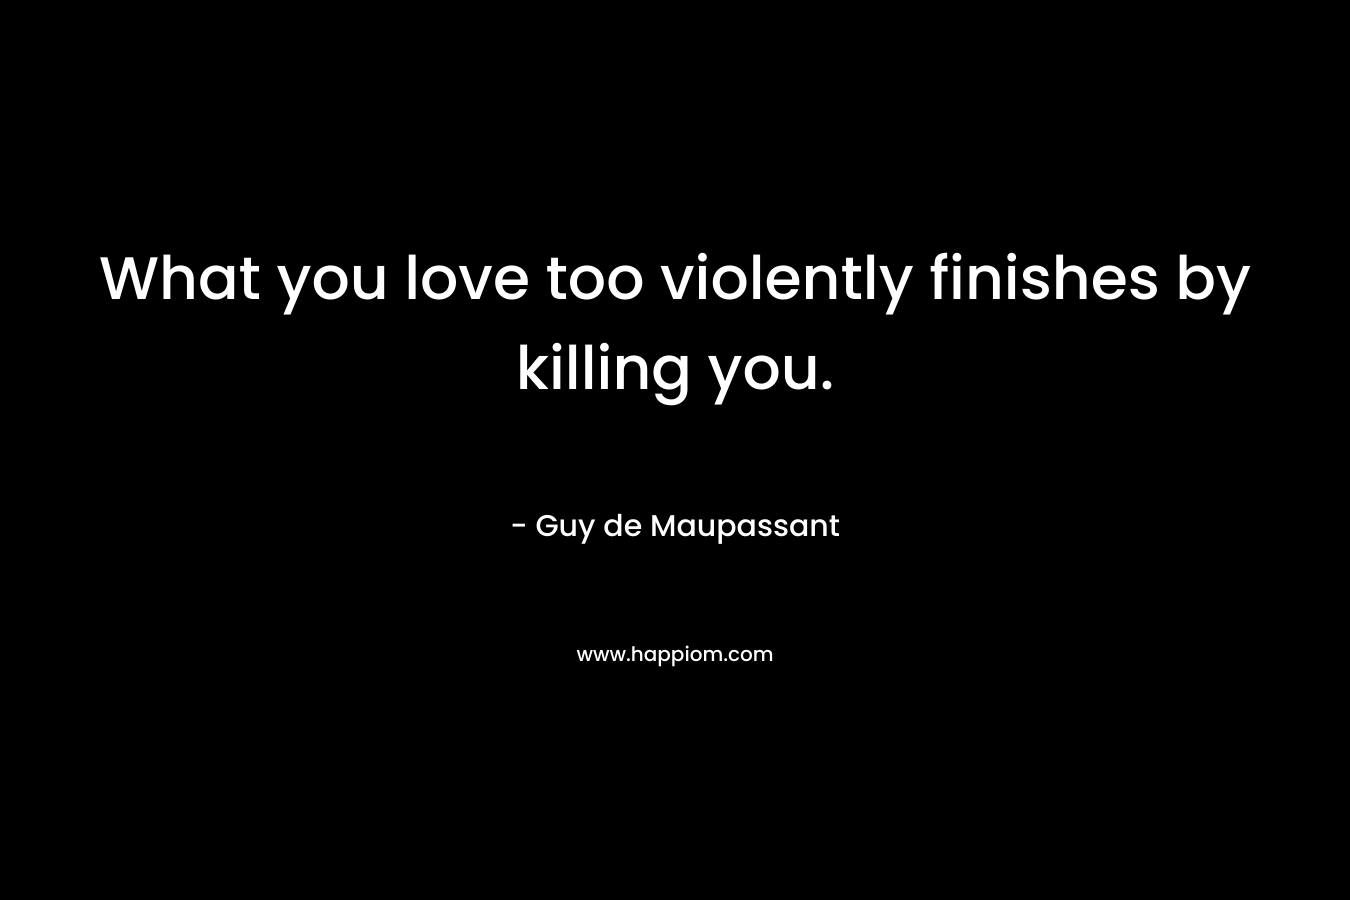 What you love too violently finishes by killing you.